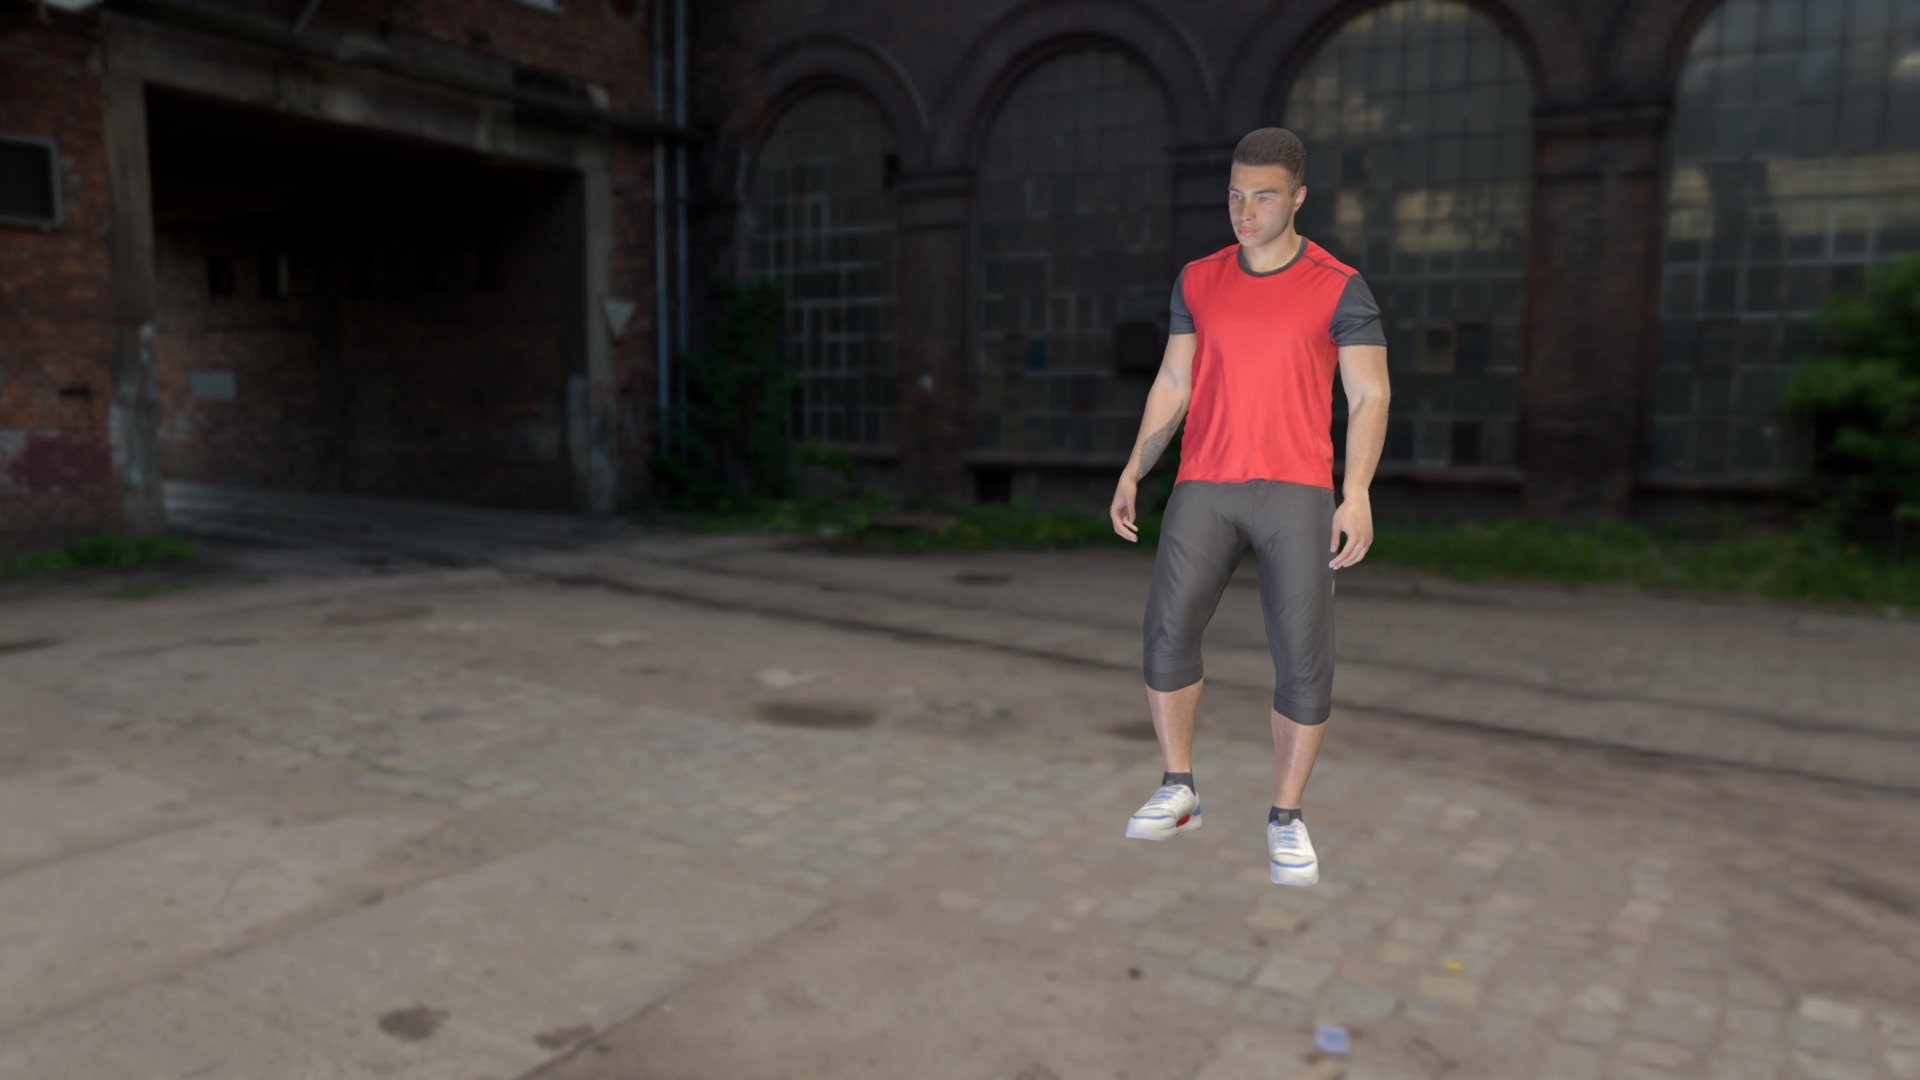 This is a true human size and detailed model of a young sporty man of Caucasian appearance dressed in sportswear. The model is rigged via Mixamo and saved in .fbx animation format. Additionally you can find this model captured in A-pose, ready for further custom rigging and animation.

Animation styles applied:


playing soccer (3 styles)
sitting (2 styles)
walking

Technical specifications:


digital double scan model
low-poly model
high-poly model (.ztl tool with 5 subdivisions) 
fully quad topology
sufficiently clean
edge loops based topology
ready for subdivision
8K texture color map
non-overlapping UV map
ready for animation
rigged via Mixamo
PBR textures 8K resolution: Normal, Displacement, Albedo maps**

Download package includes a Cinema 4D project file with Redshift shader, OBJ, FBX, STL files, which are applicable for 3ds Max, Unreal Engine, Unity, Blender, etc. 

Video preview: https://youtu.be/7hMFZoSXWwM

3D EVERYTHING - Animated young man playing football 365 - Buy Royalty Free 3D model by deep3dstudio 3d model